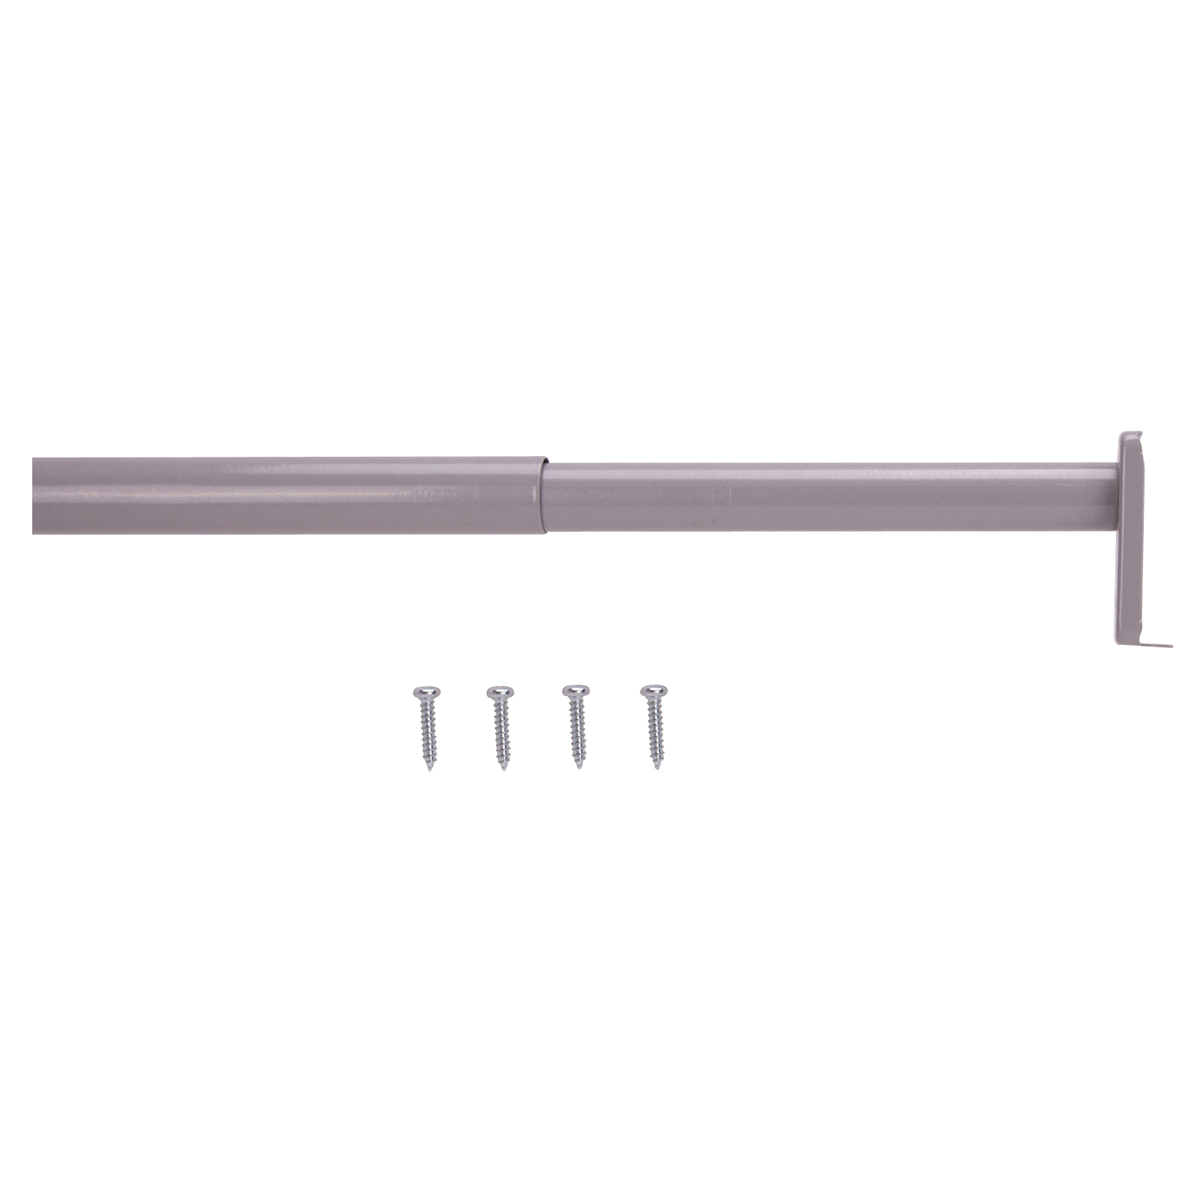 21012ZCX-PS Adjustable Closet Rod, 18 to 30 in L, Steel, Silver